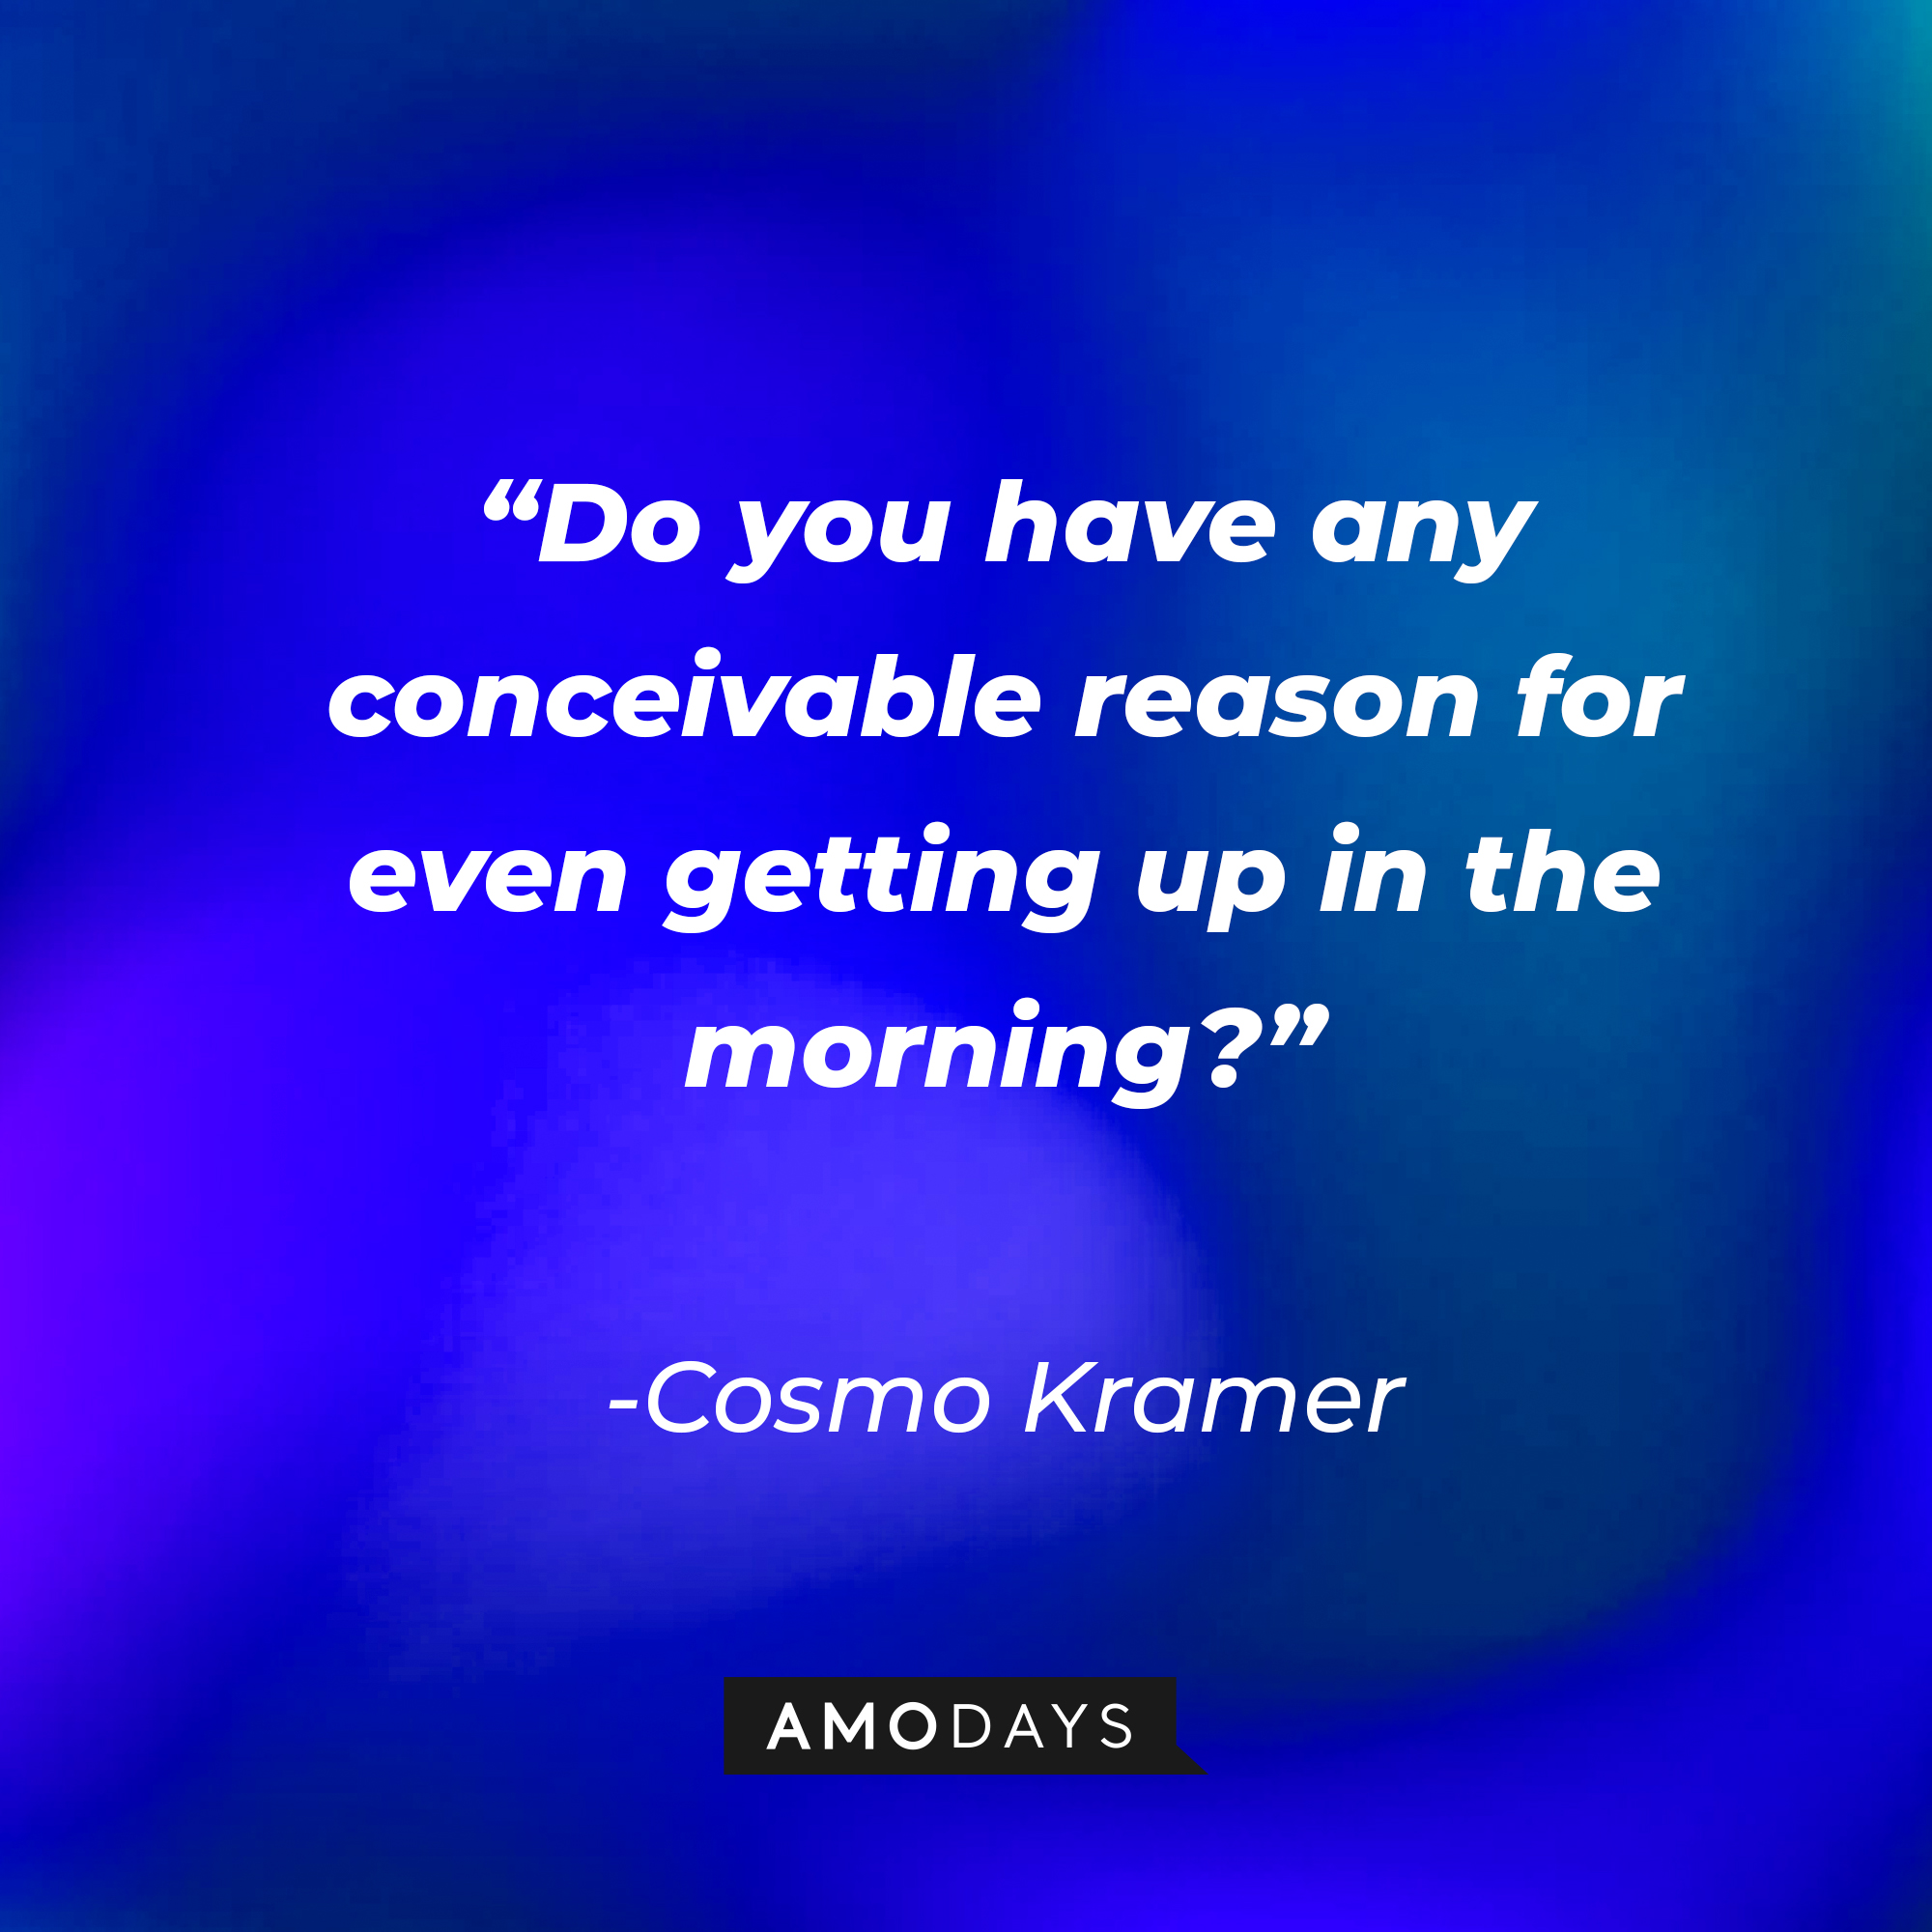 Cosmo Kramer’s quote: “Do you have any conceivable reason for even getting up in the morning?” | Source: AmoDays